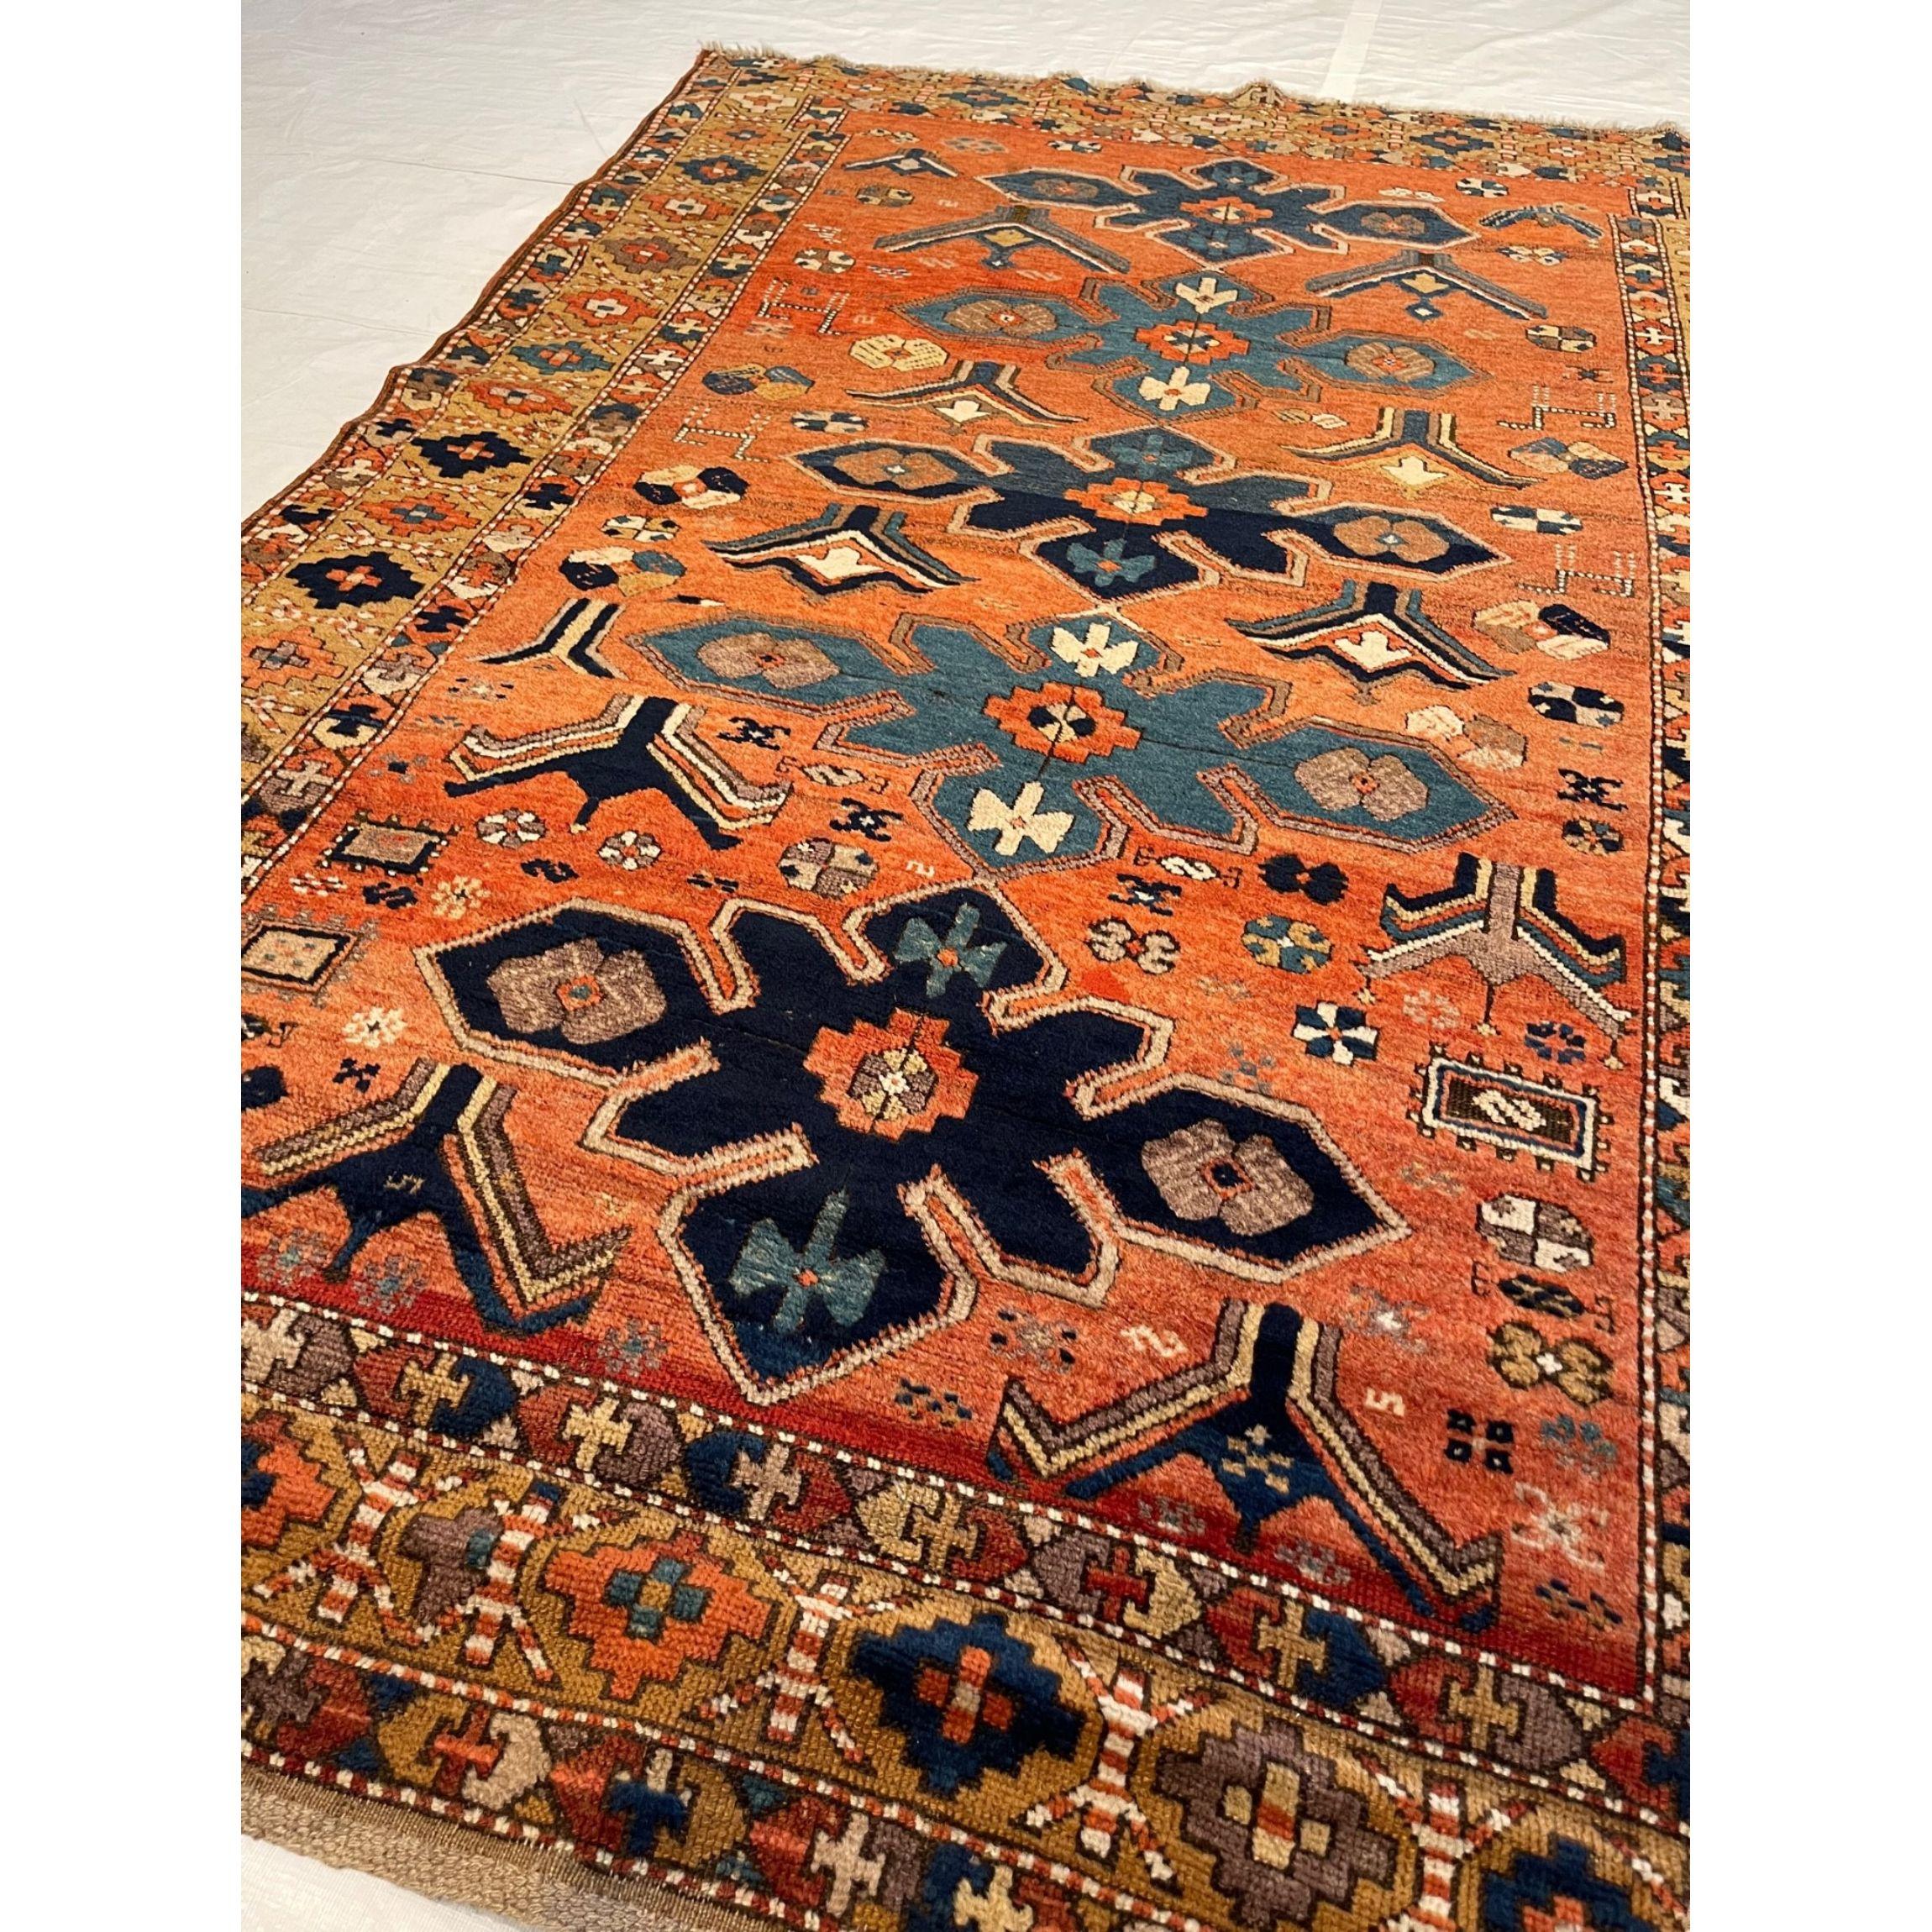 The antique Caucasian rugs get their name from the area in which they were made – the Caucasus. The Caucasus is a region that produces distinctive rugs since the end of the 18th century and the antique Caucasian rugs are primarily produced as